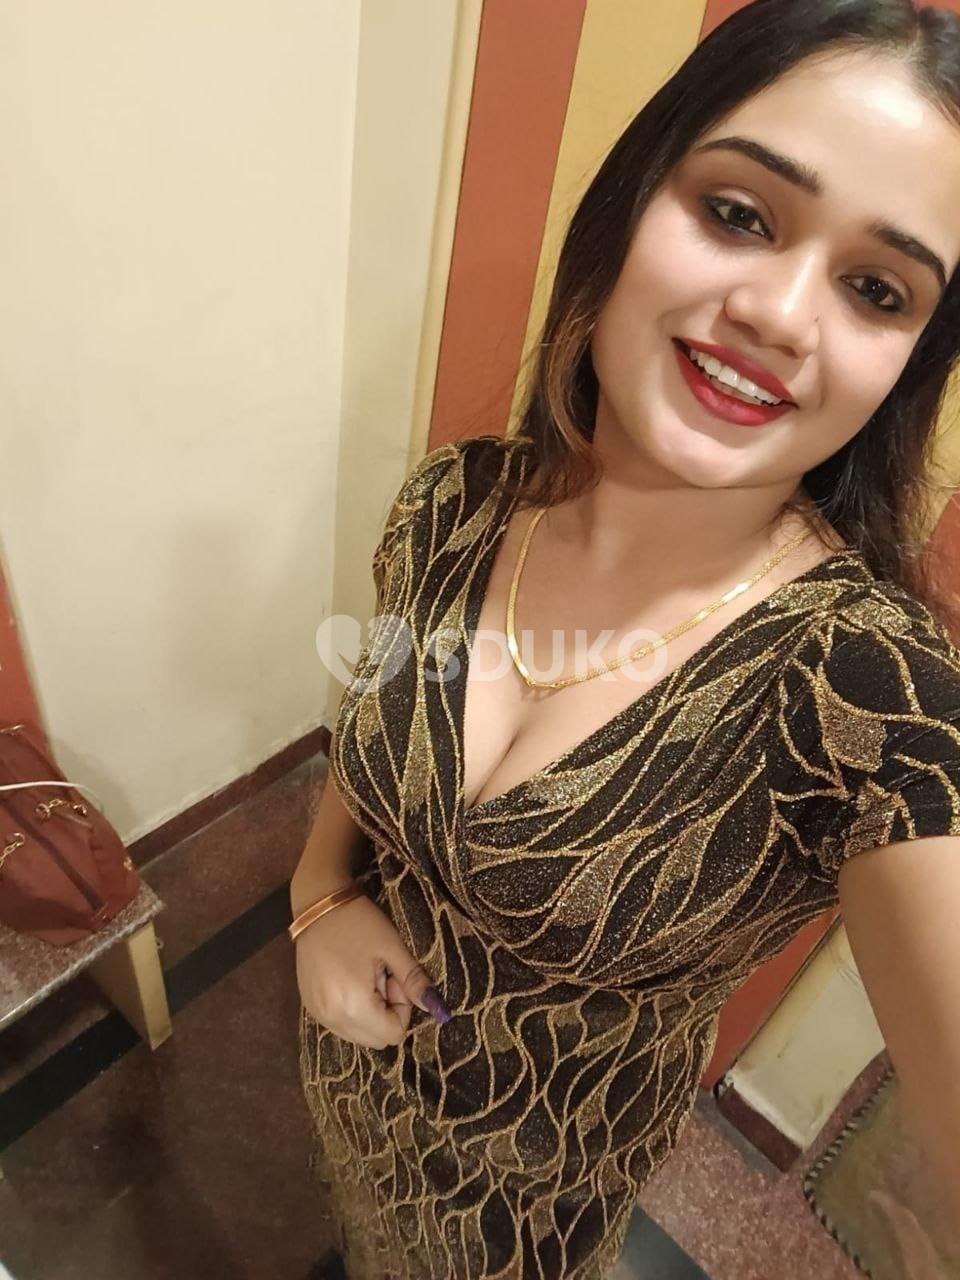 CALL-GIRL IN ROHINI LOW COST DOORSTEP HIGH PROFILE CALL GIRL SERVICES